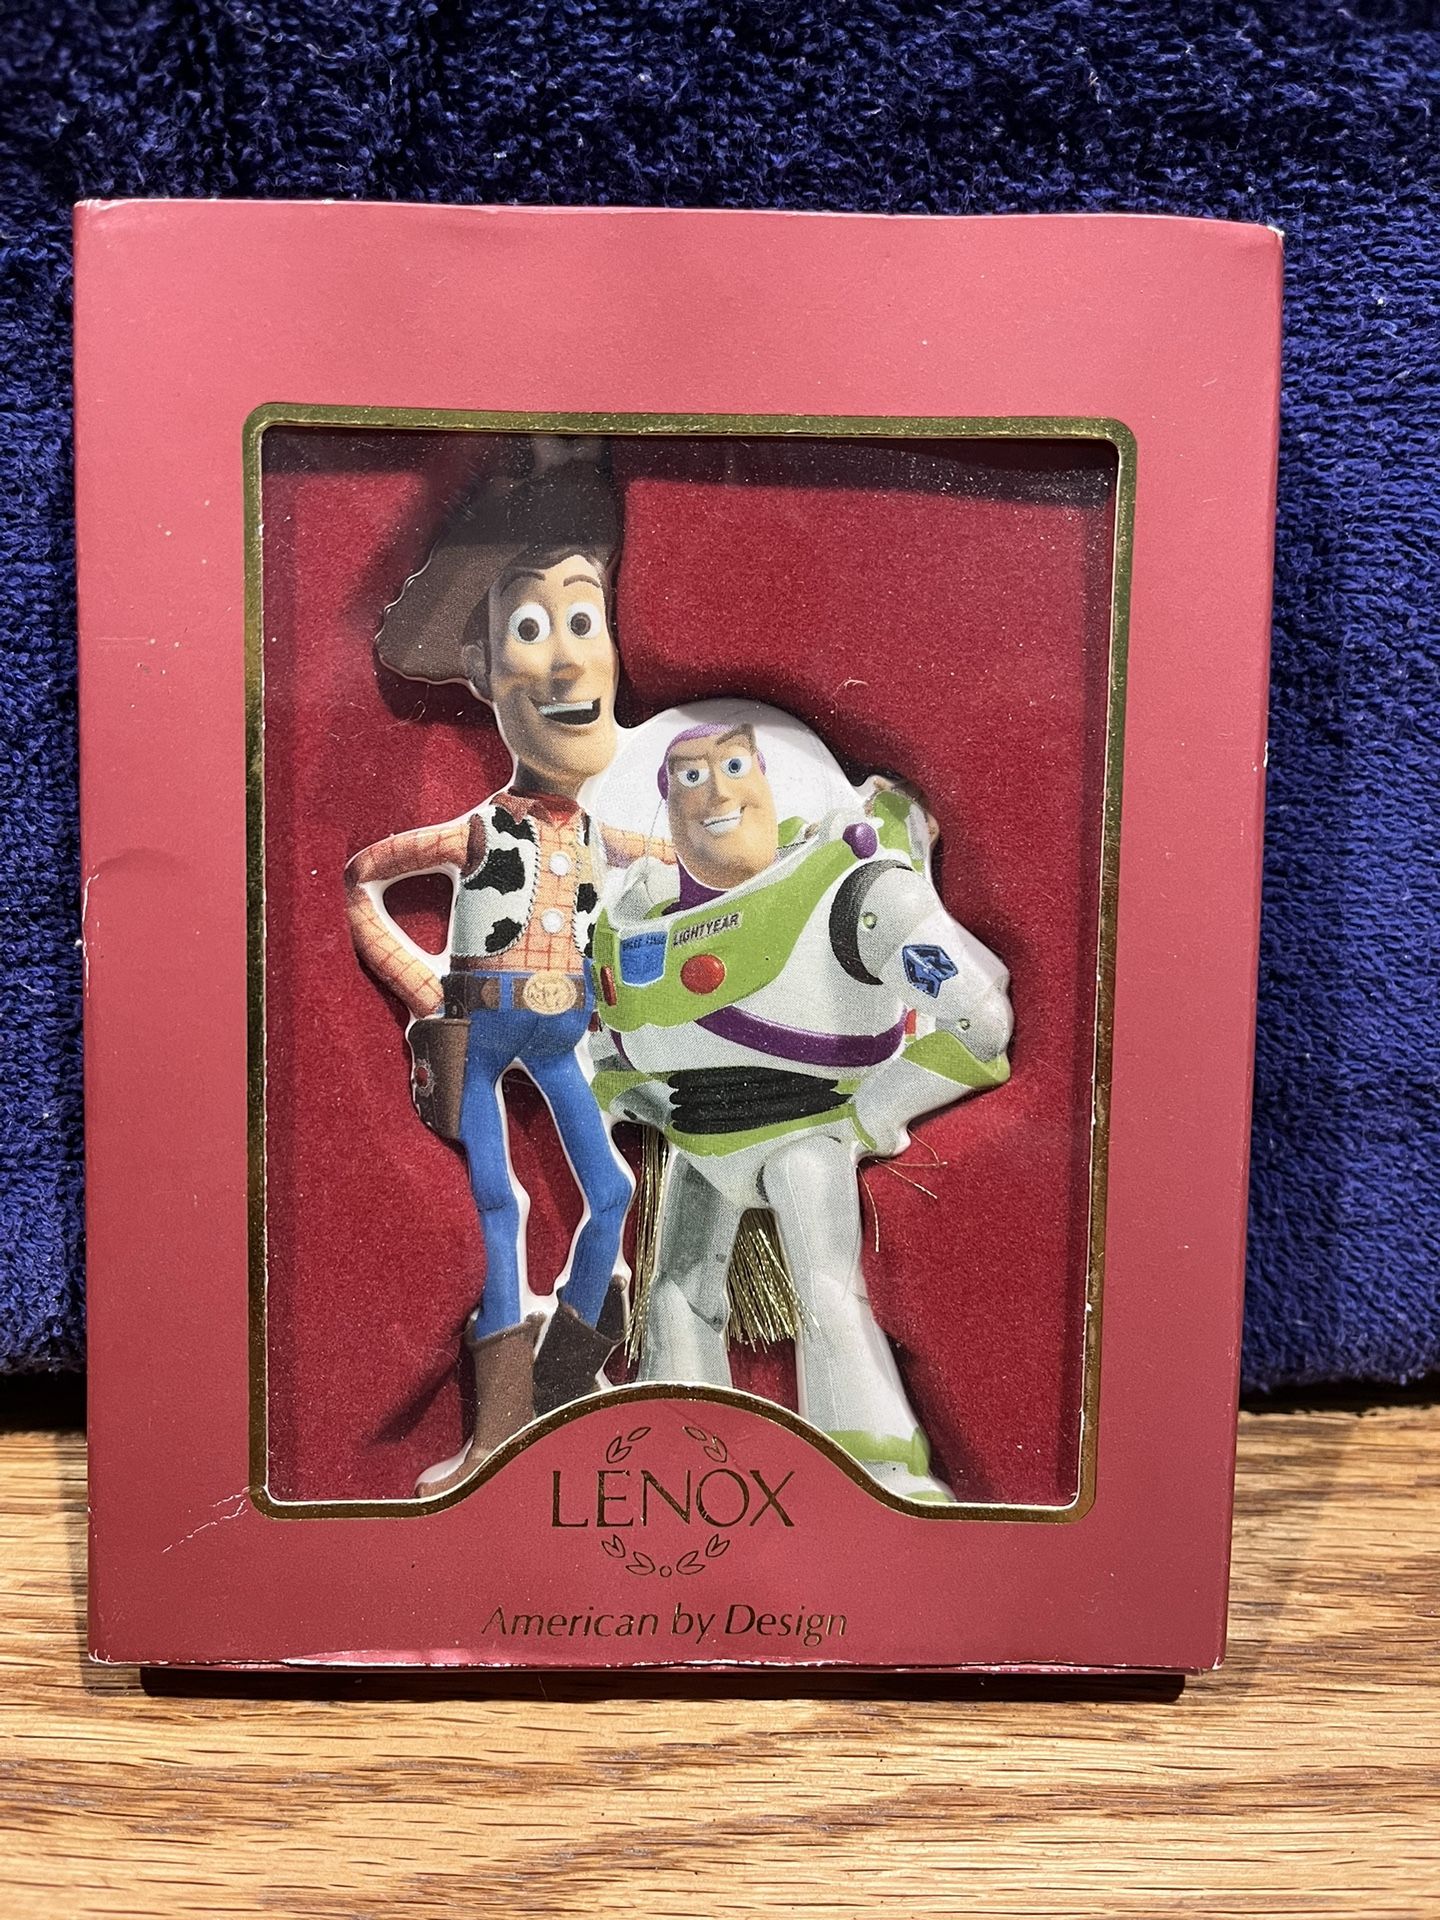 Woody And Buzz Light year Lenox Ornament 